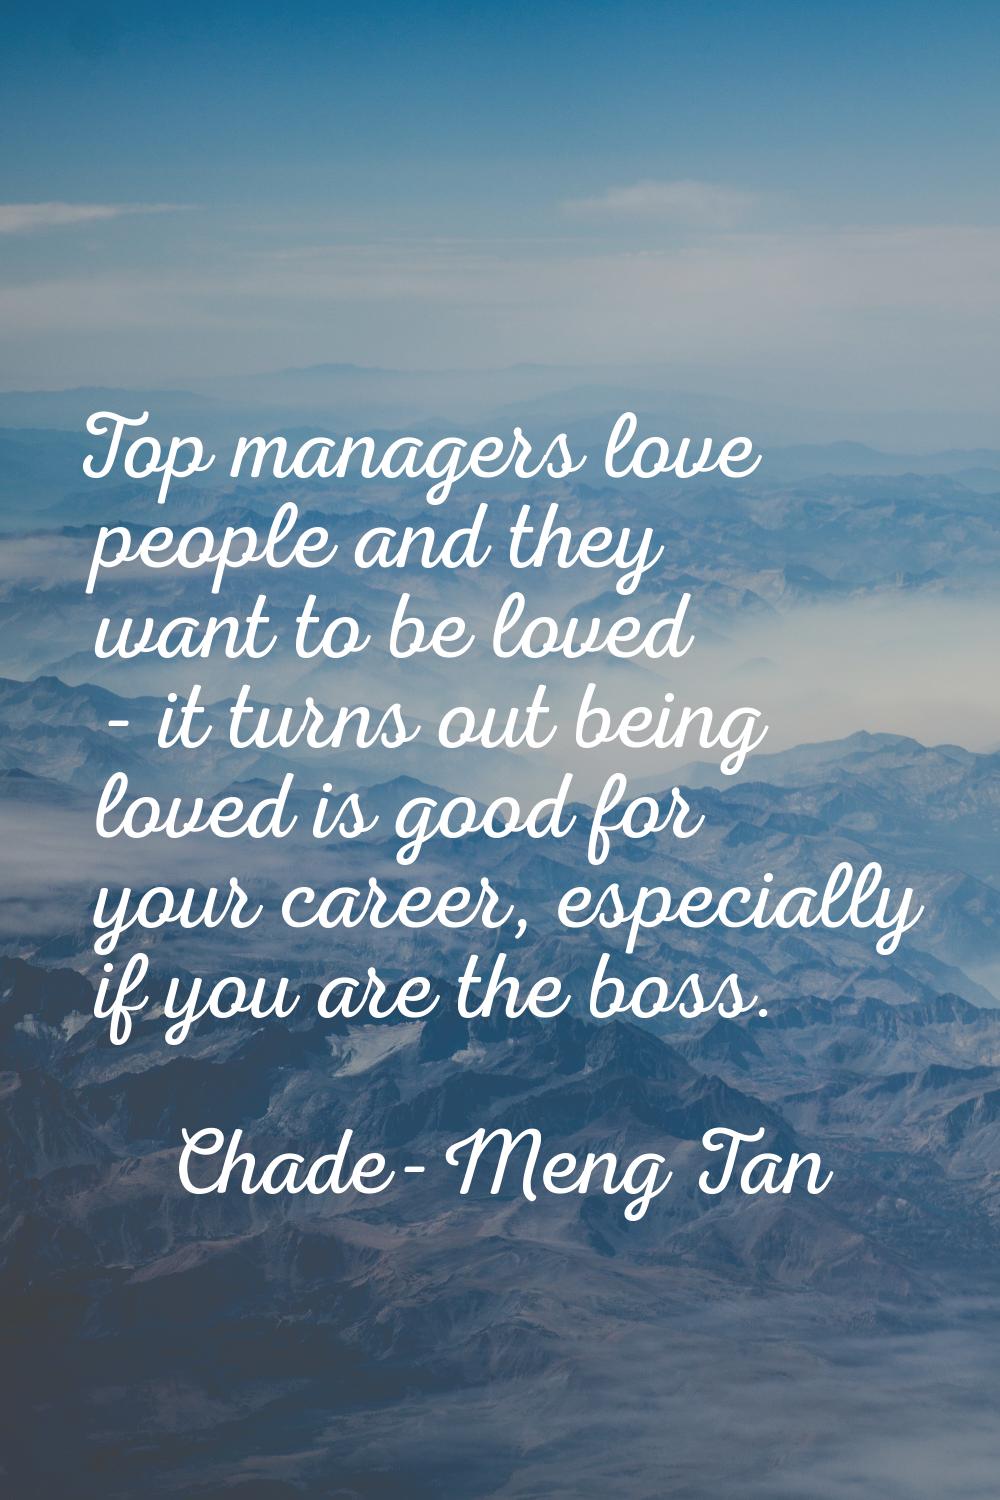 Top managers love people and they want to be loved - it turns out being loved is good for your care